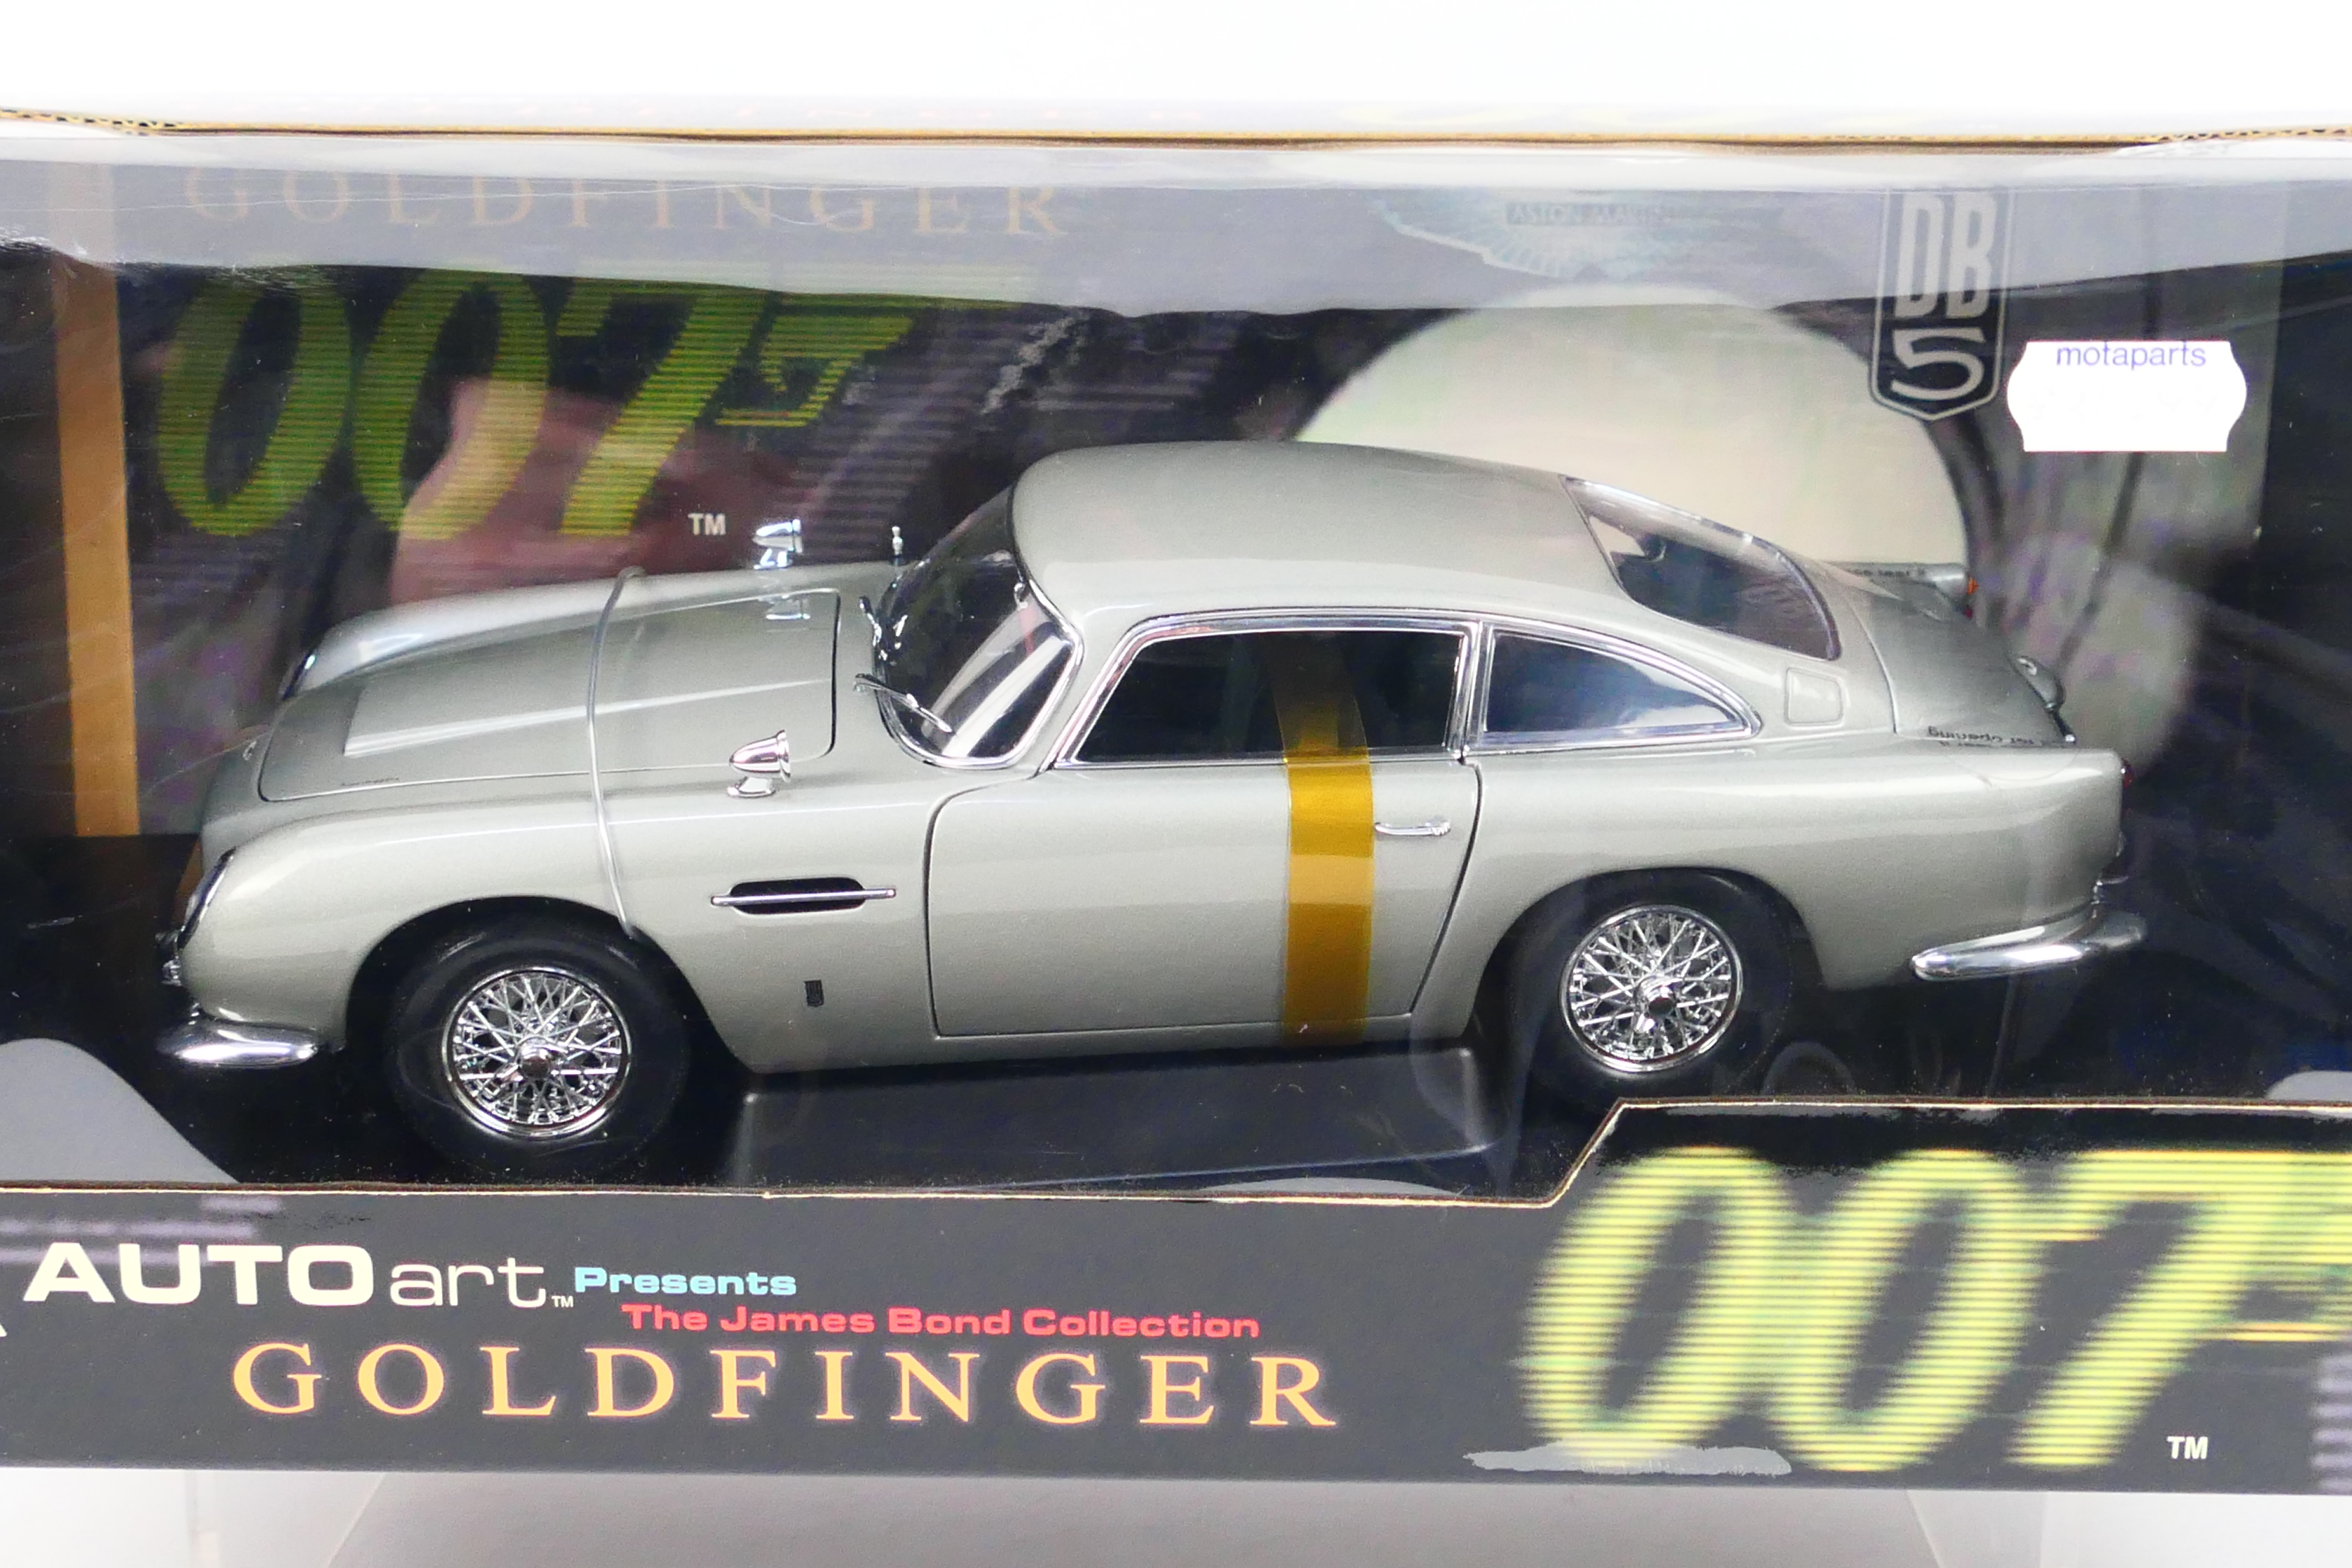 AutoArt - A boxed AutoArt #70020 1:18 scale 'The James Bond Collection' Aston Martin DB5 (RHD) from - Image 2 of 3